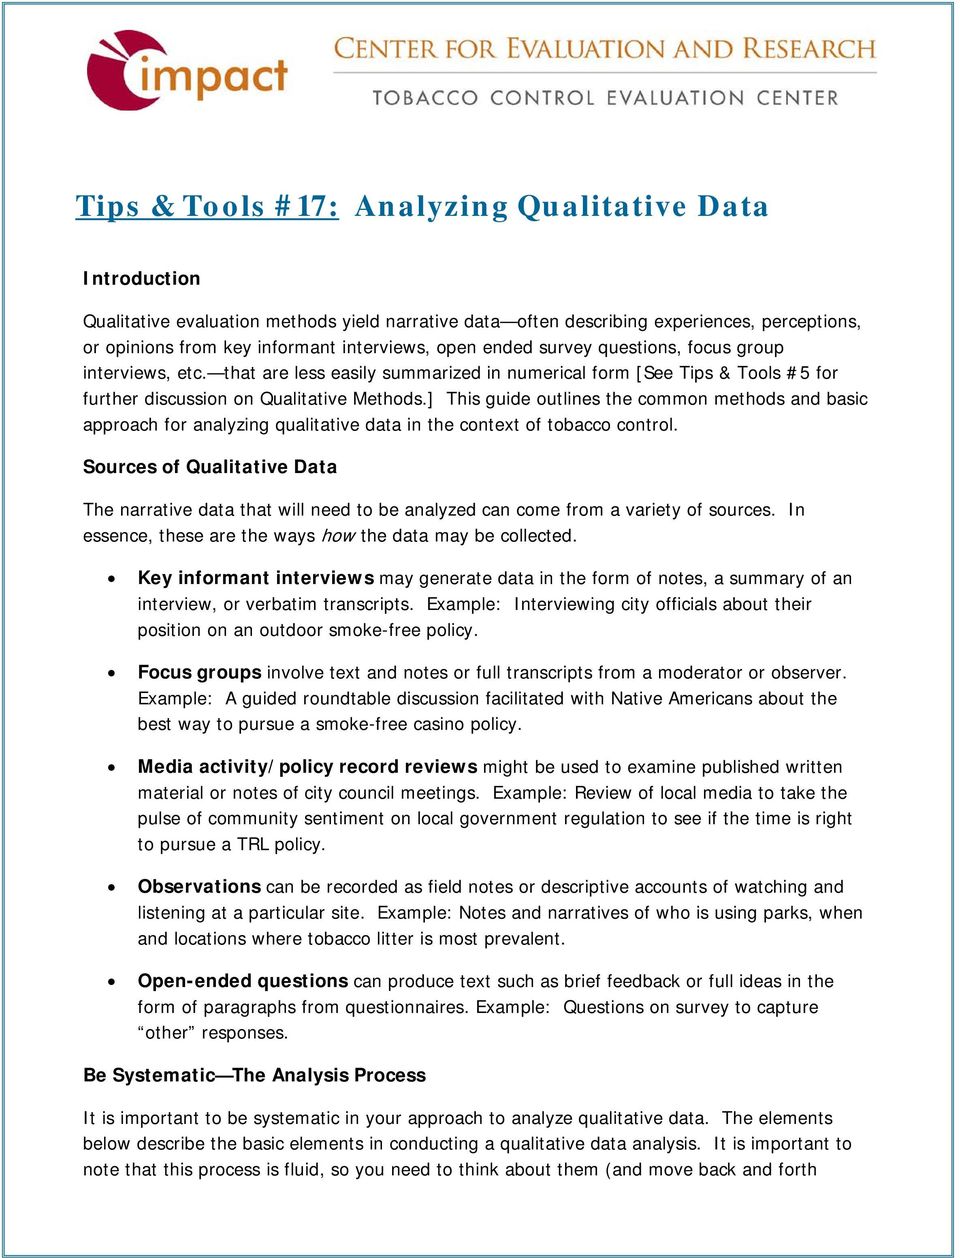 ] This guide outlines the common methods and basic approach for analyzing qualitative data in the context of tobacco control.